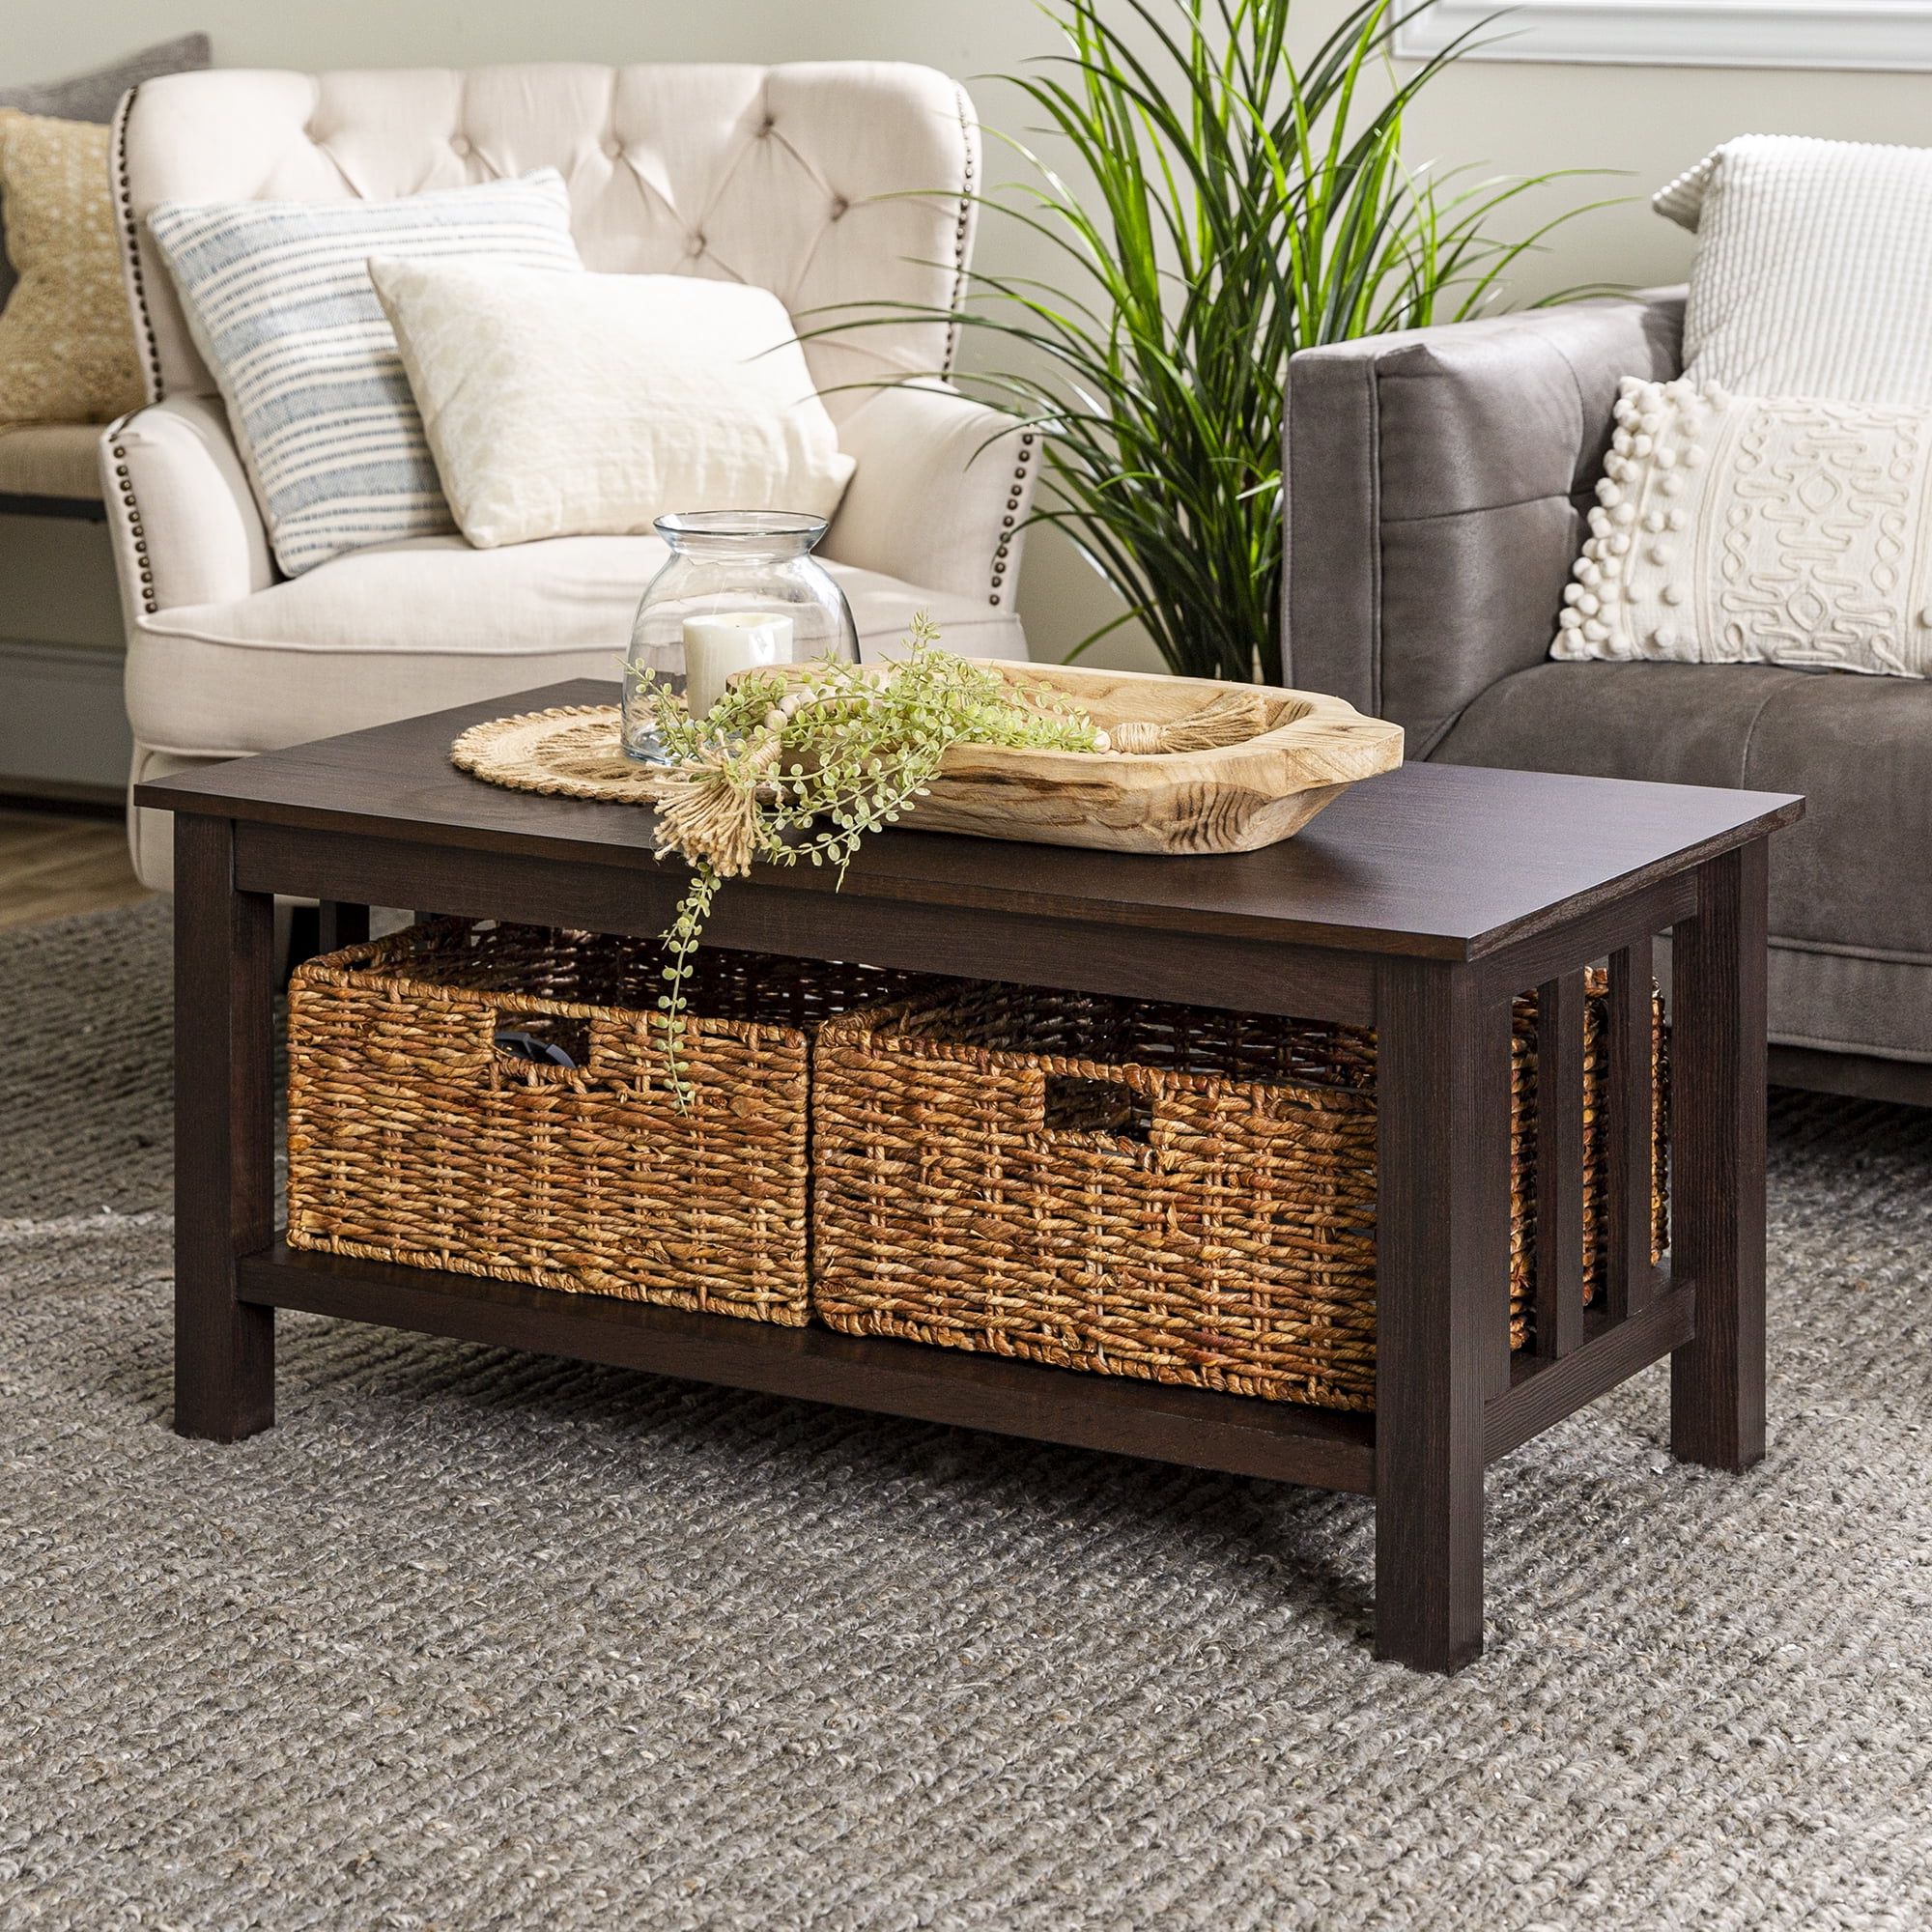 2020 Woven Paths Coffee Tables Within Woven Paths Traditional Storage Coffee Table With Bins, Espresso (Photo 5 of 15)